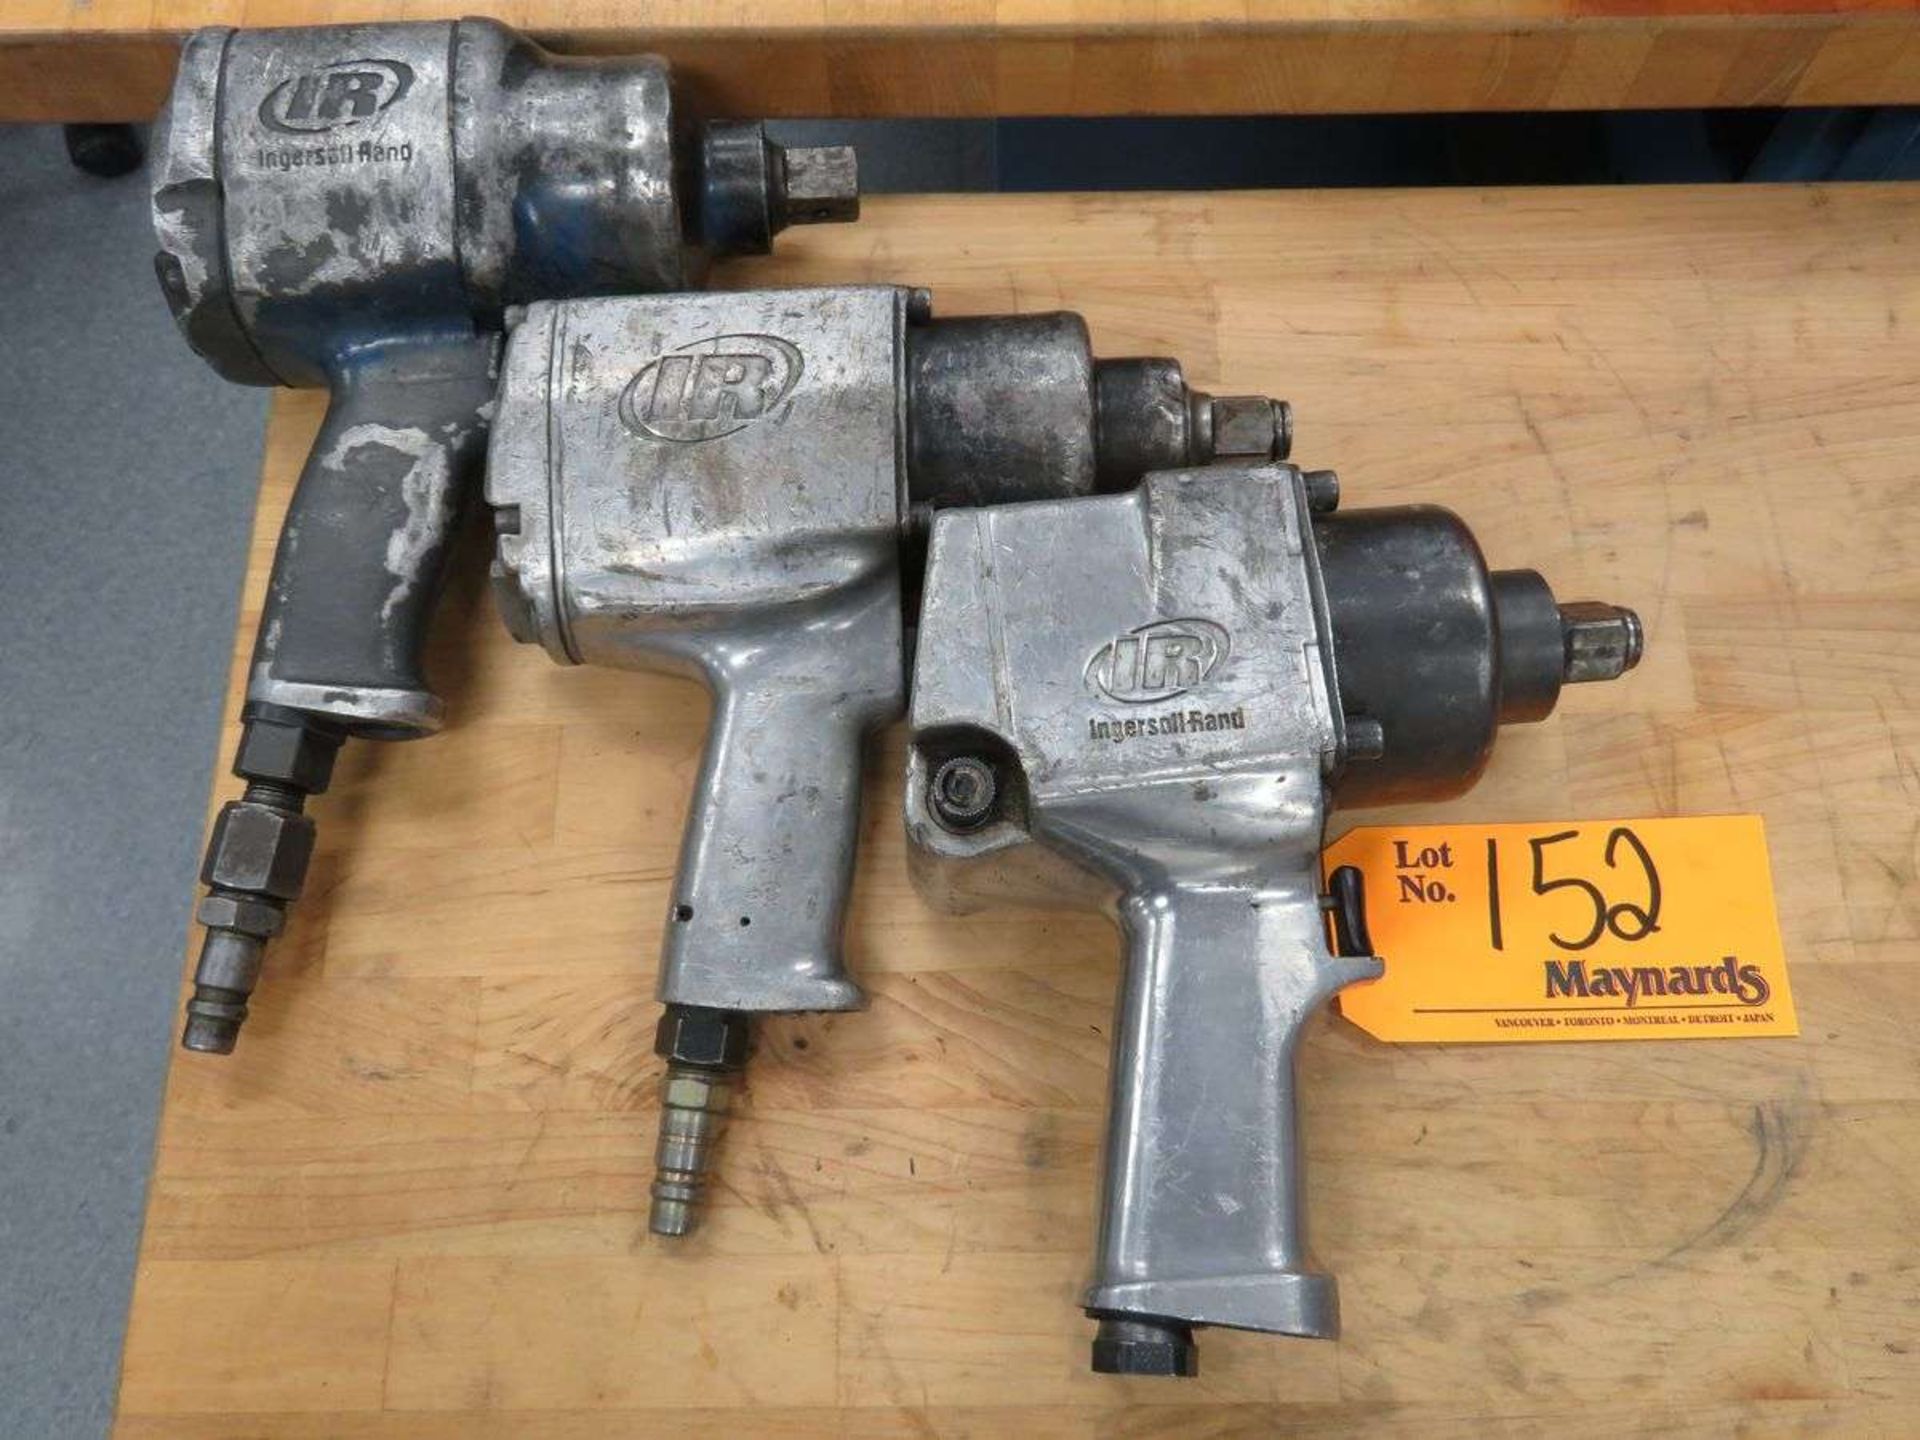 Ingersoll-Rand (3) Pneumatic Impact Wrenches